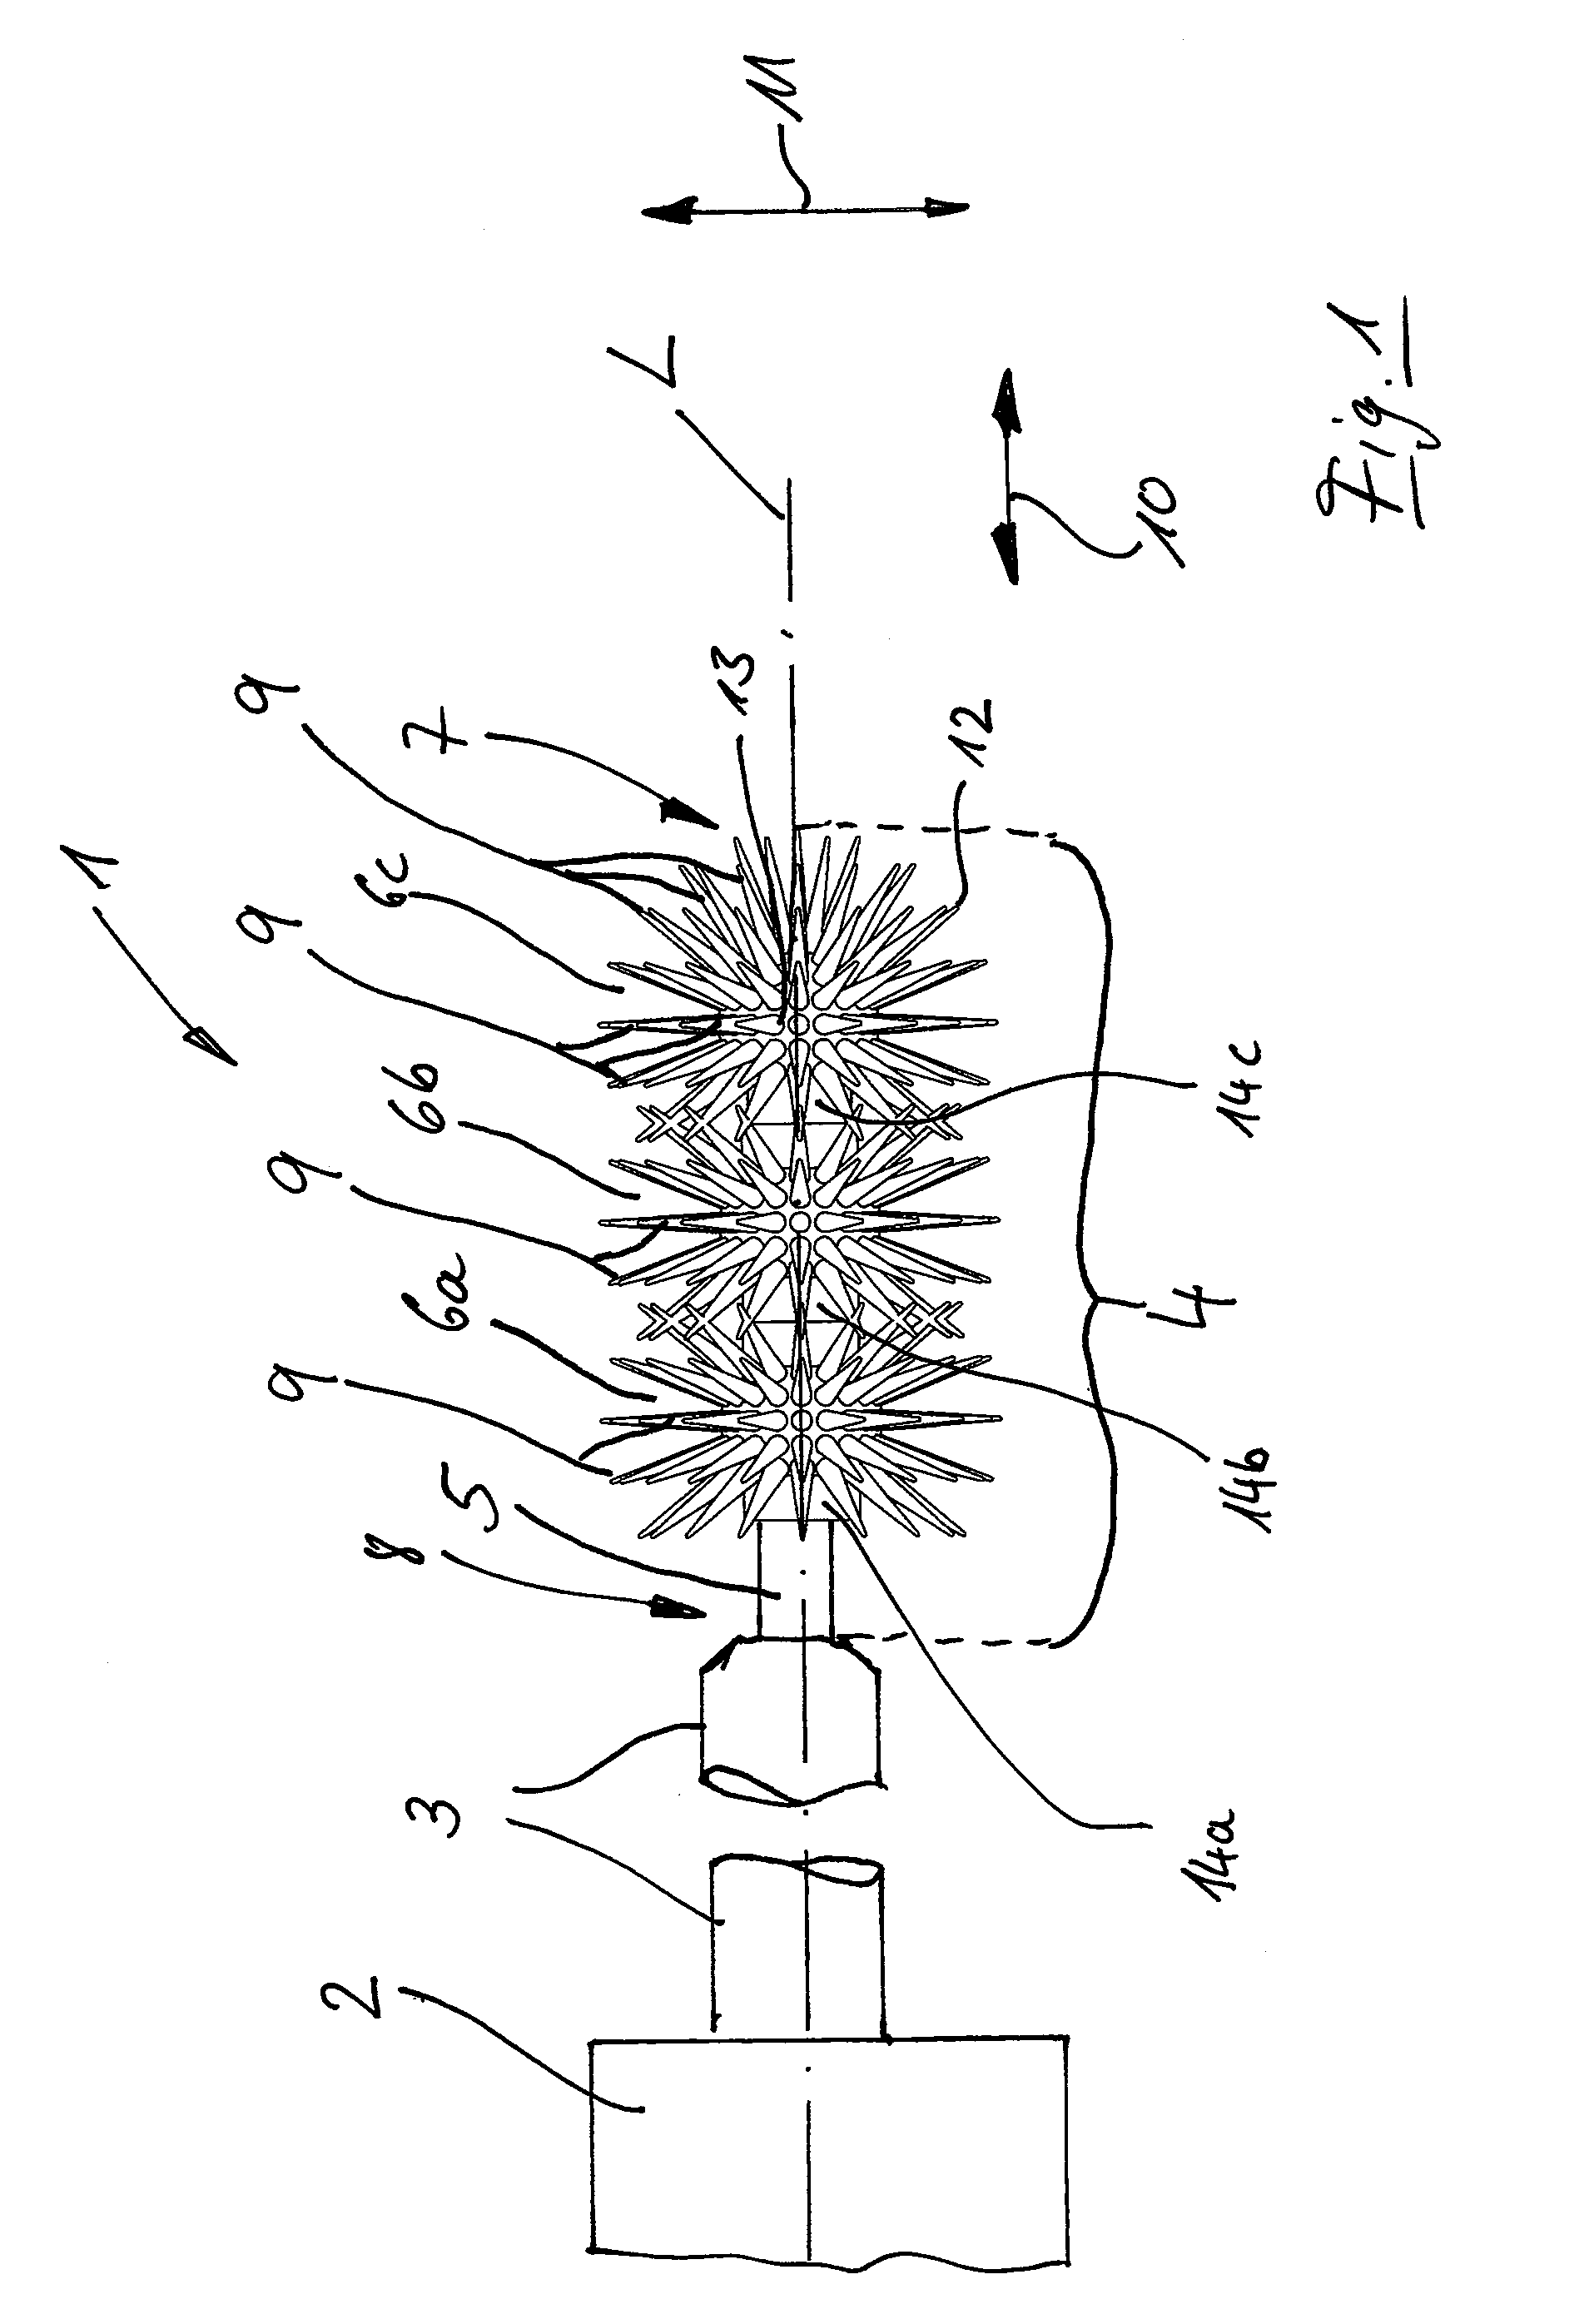 Applicator device for applying a cosmetic, applicator element therefor, and cosmetic unit comprising the applicator device